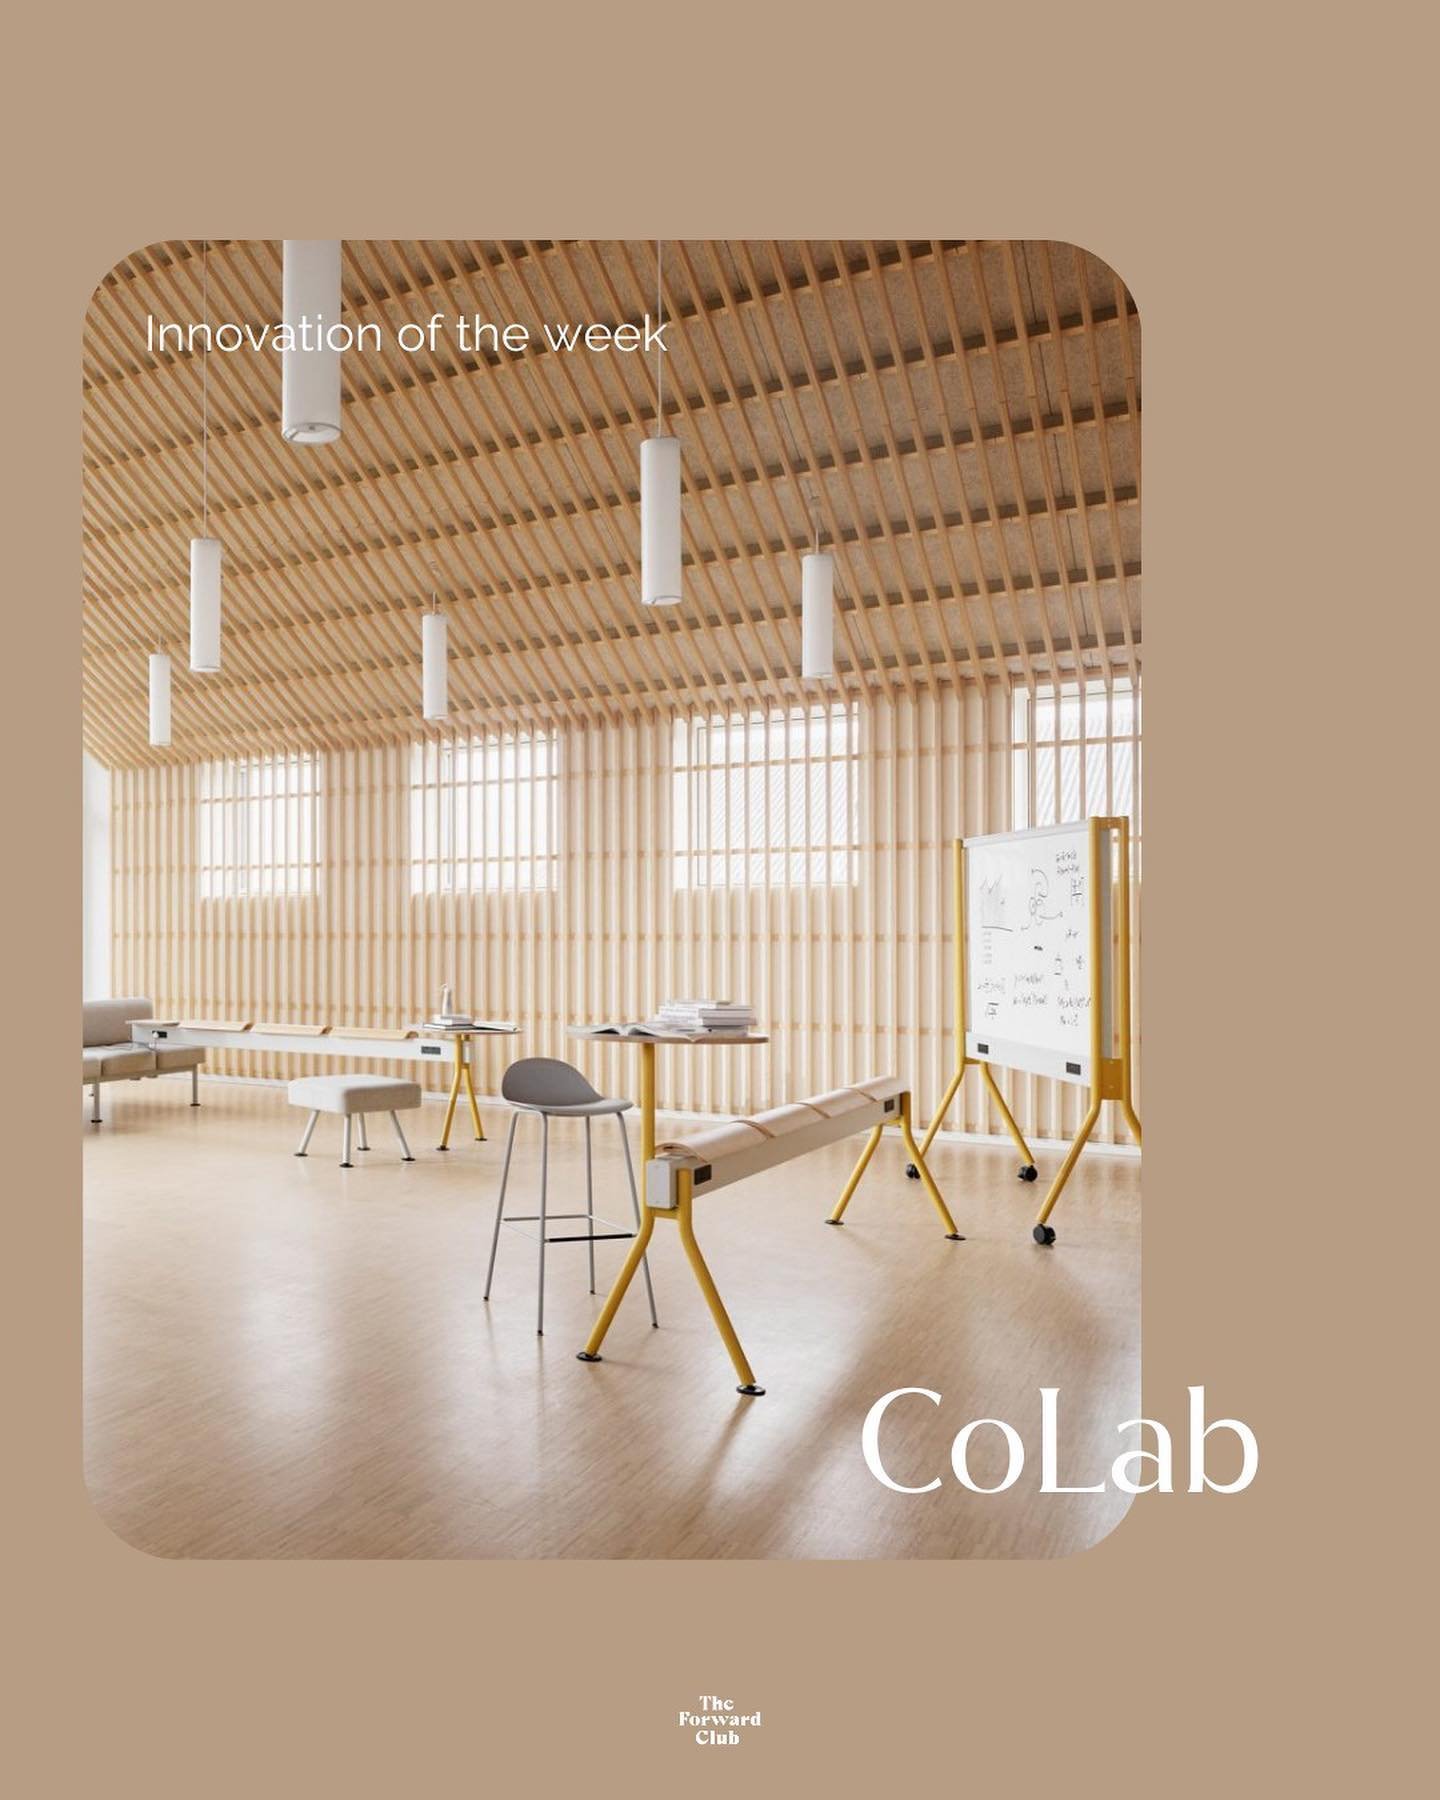 Say hi to hybrid school furniture that&rsquo;s suitable for future education! 📚 

CoLab addresses a pressing issue in traditional workplaces: engaging Gen Z employees. Research reveals that understanding shifts in educational delivery is key to effe